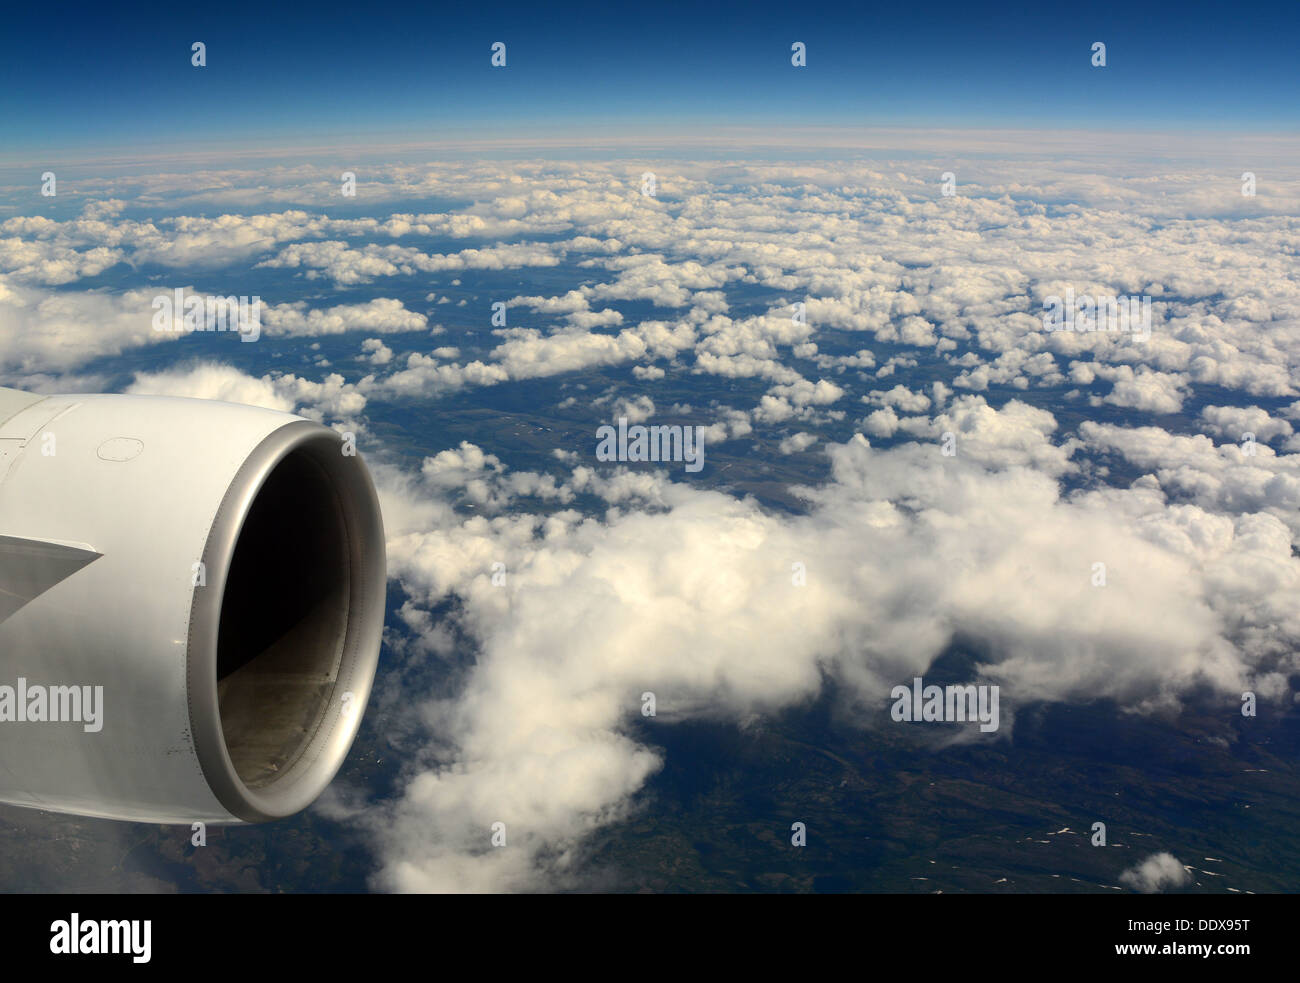 Airplane engine in mid air Stock Photo